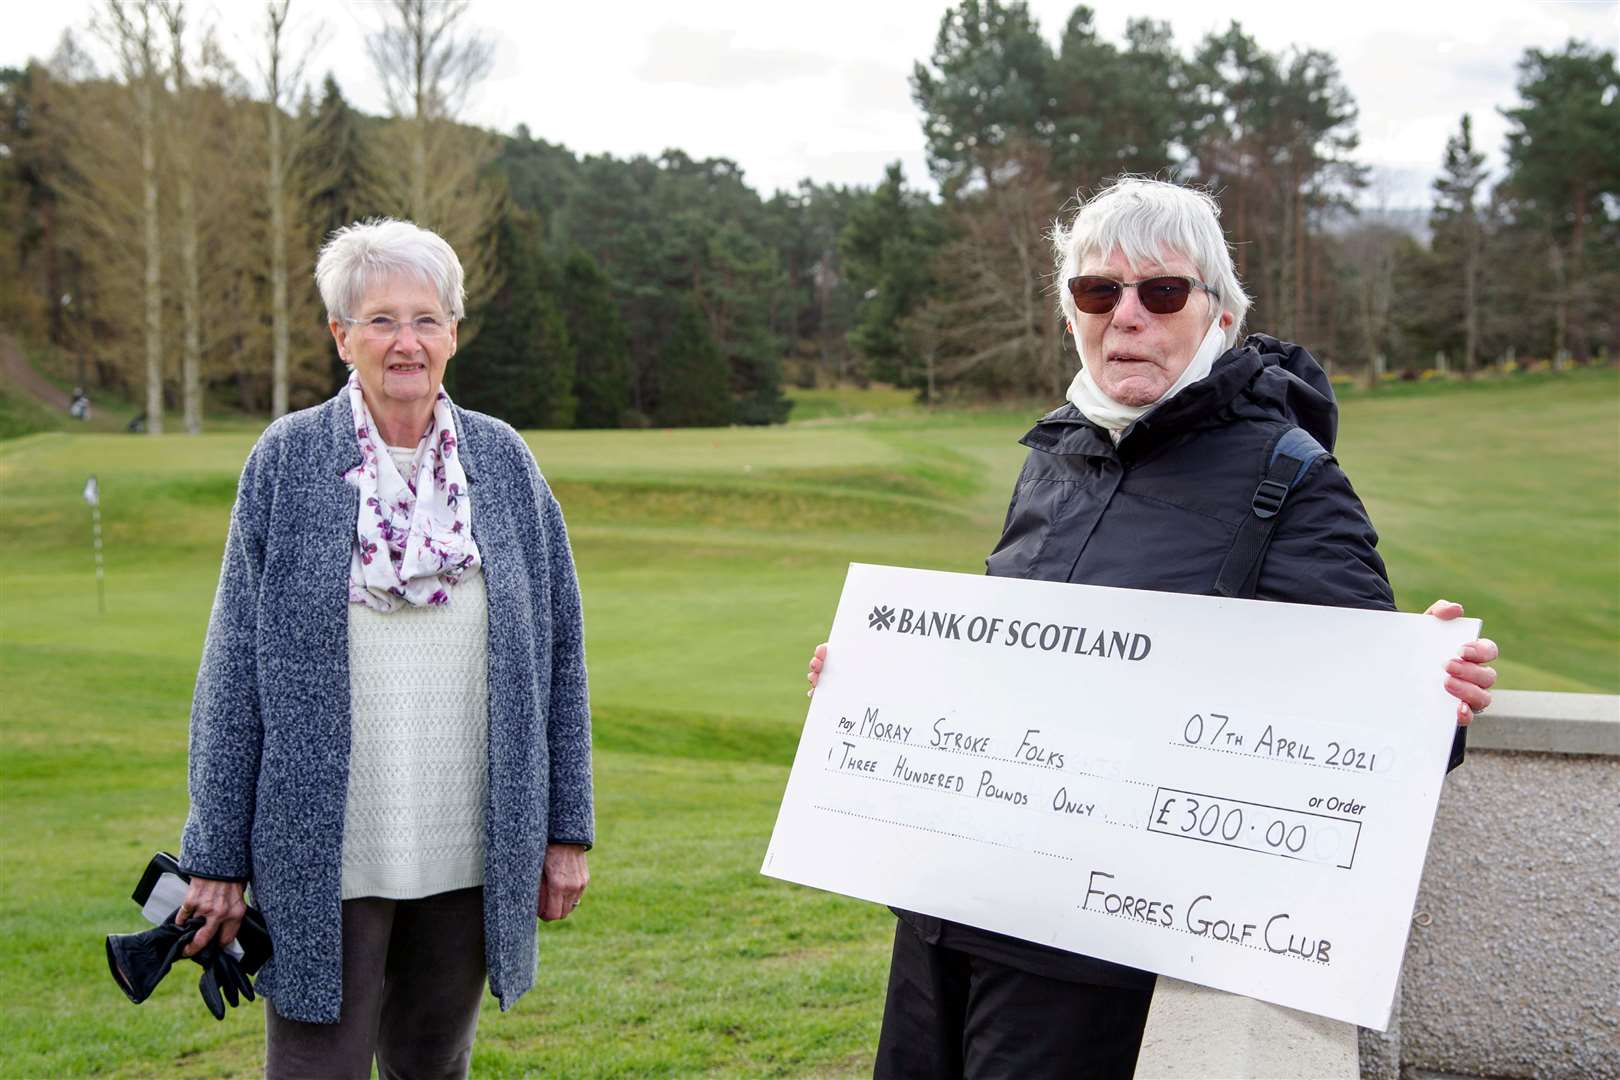 Dorothy Marshall (right) hands a cheque for £300 over to Rosemary Warde, chairwoman of Moray Stroke Folks.